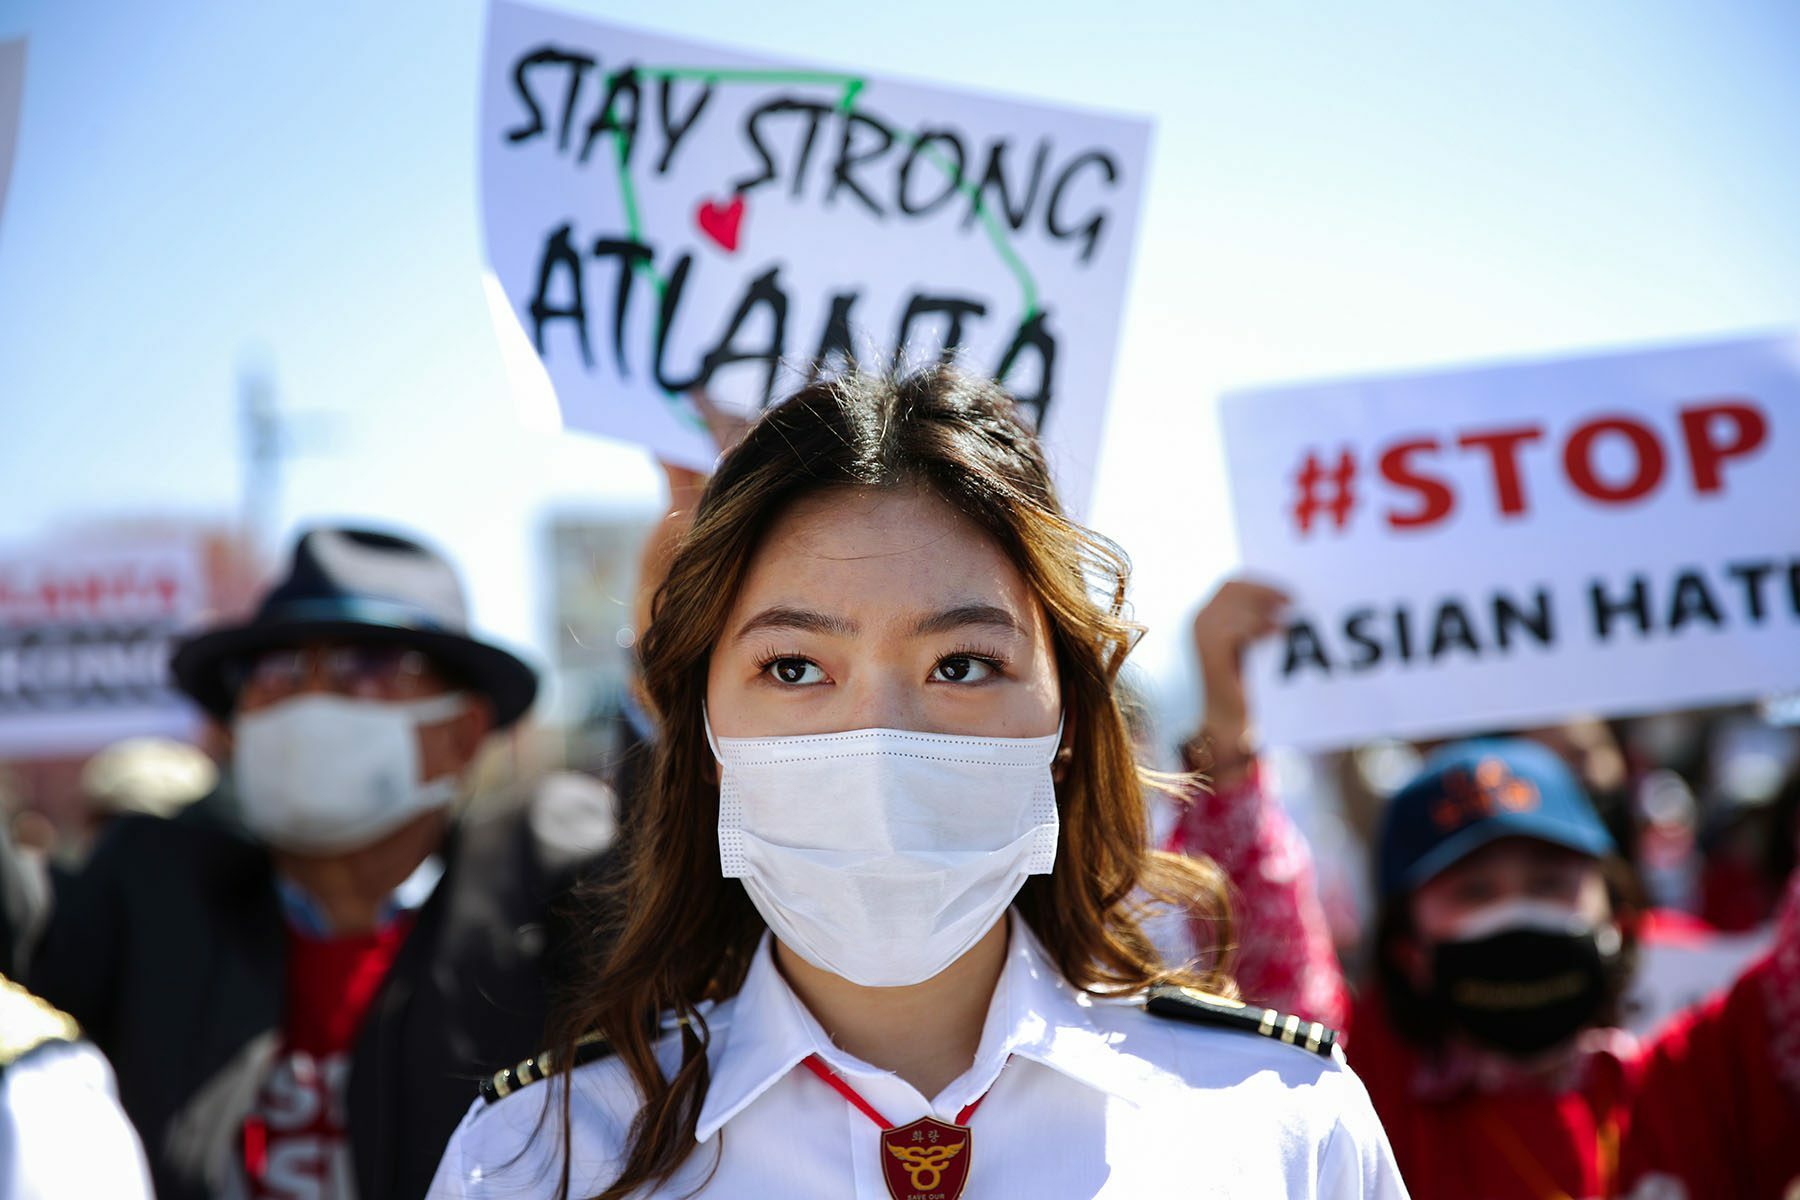 A woman wearing a face mask is pictured at a demonstration.